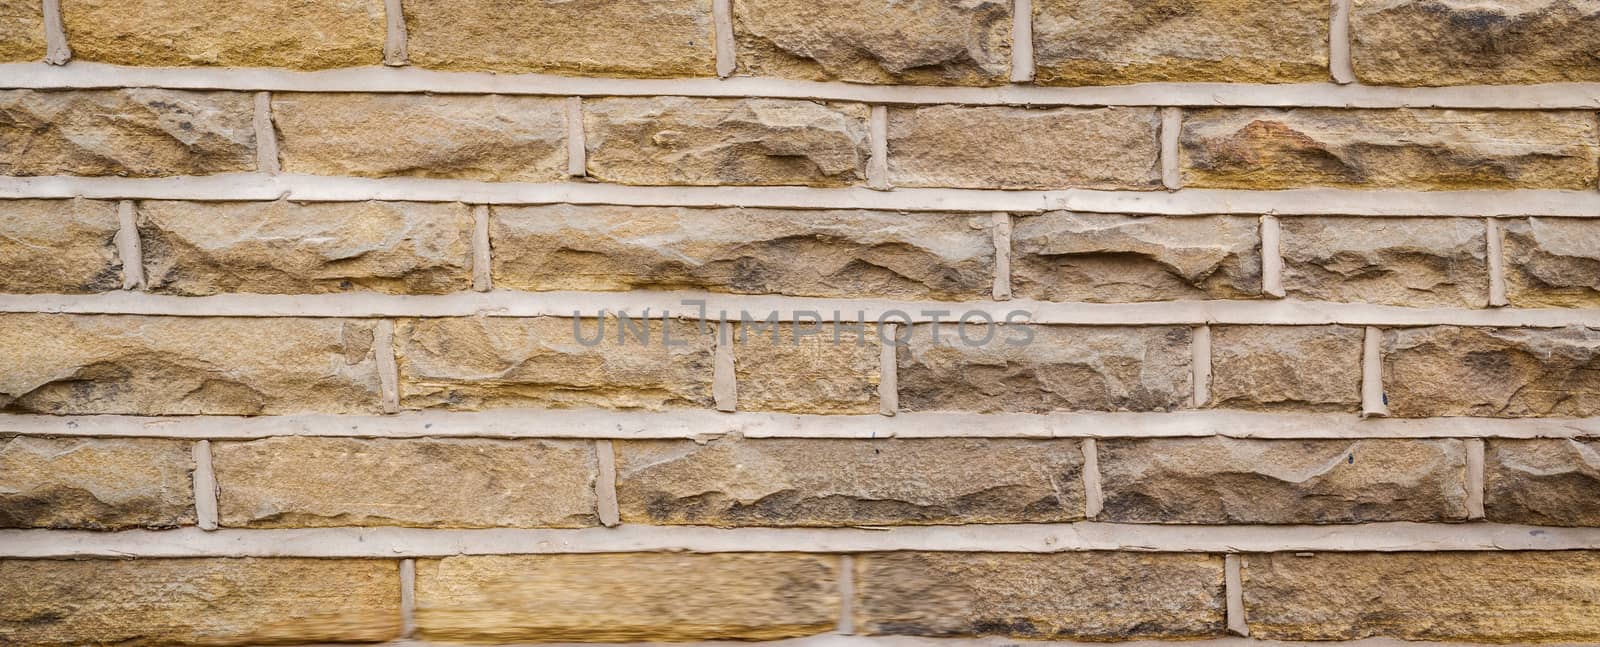 Brick Wall Panorama with white pointing